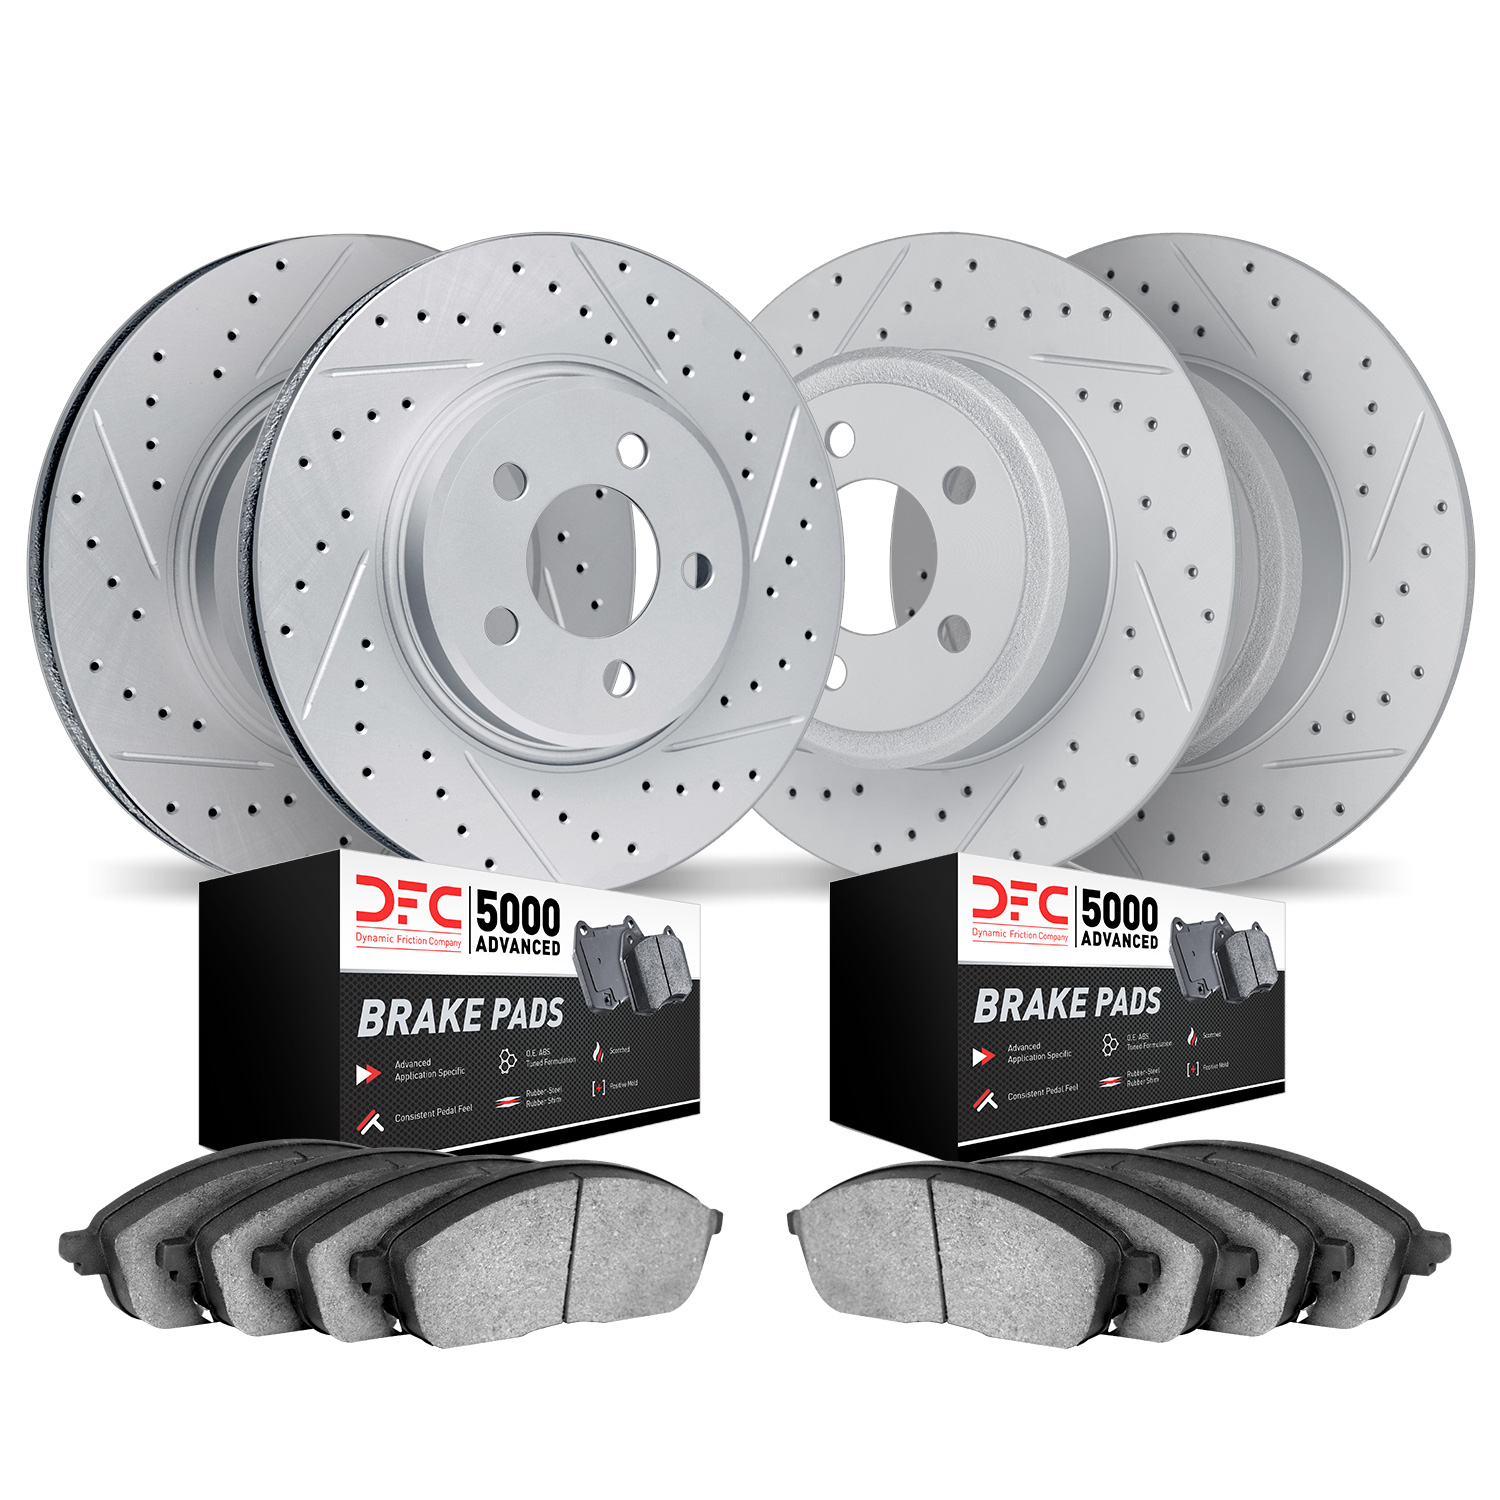 2504-56006 Geoperformance Drilled/Slotted Rotors w/5000 Advanced Brake Pads Kit, 1996-1997 Ford/Lincoln/Mercury/Mazda, Position: